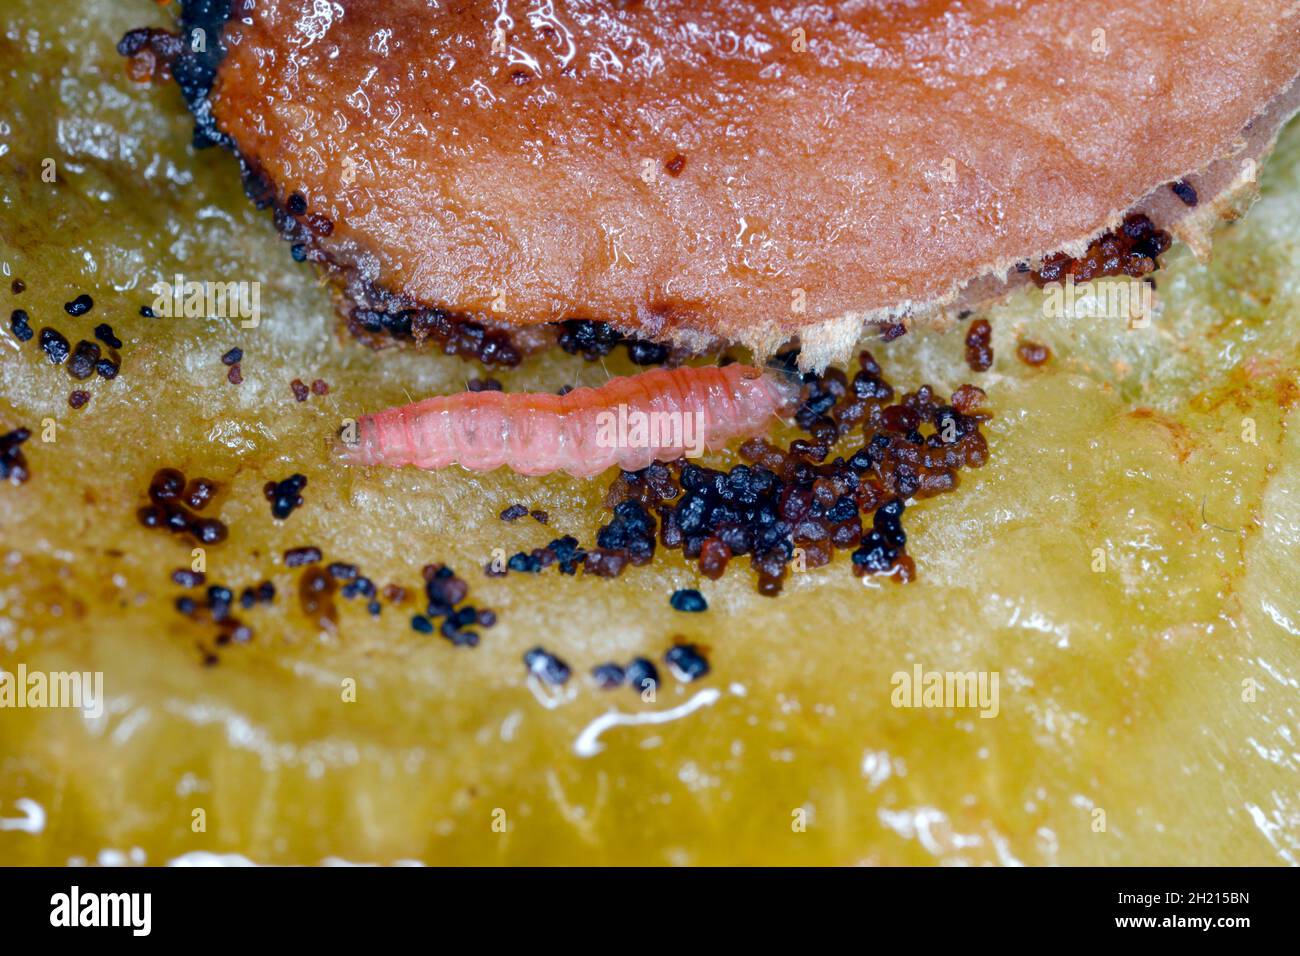 Larva of Plum fruit moth - Grapholita (sometimes Cydia) funebrana in plum friut. It is a moth of the family Tortricidae, an important pest of plums. Stock Photo